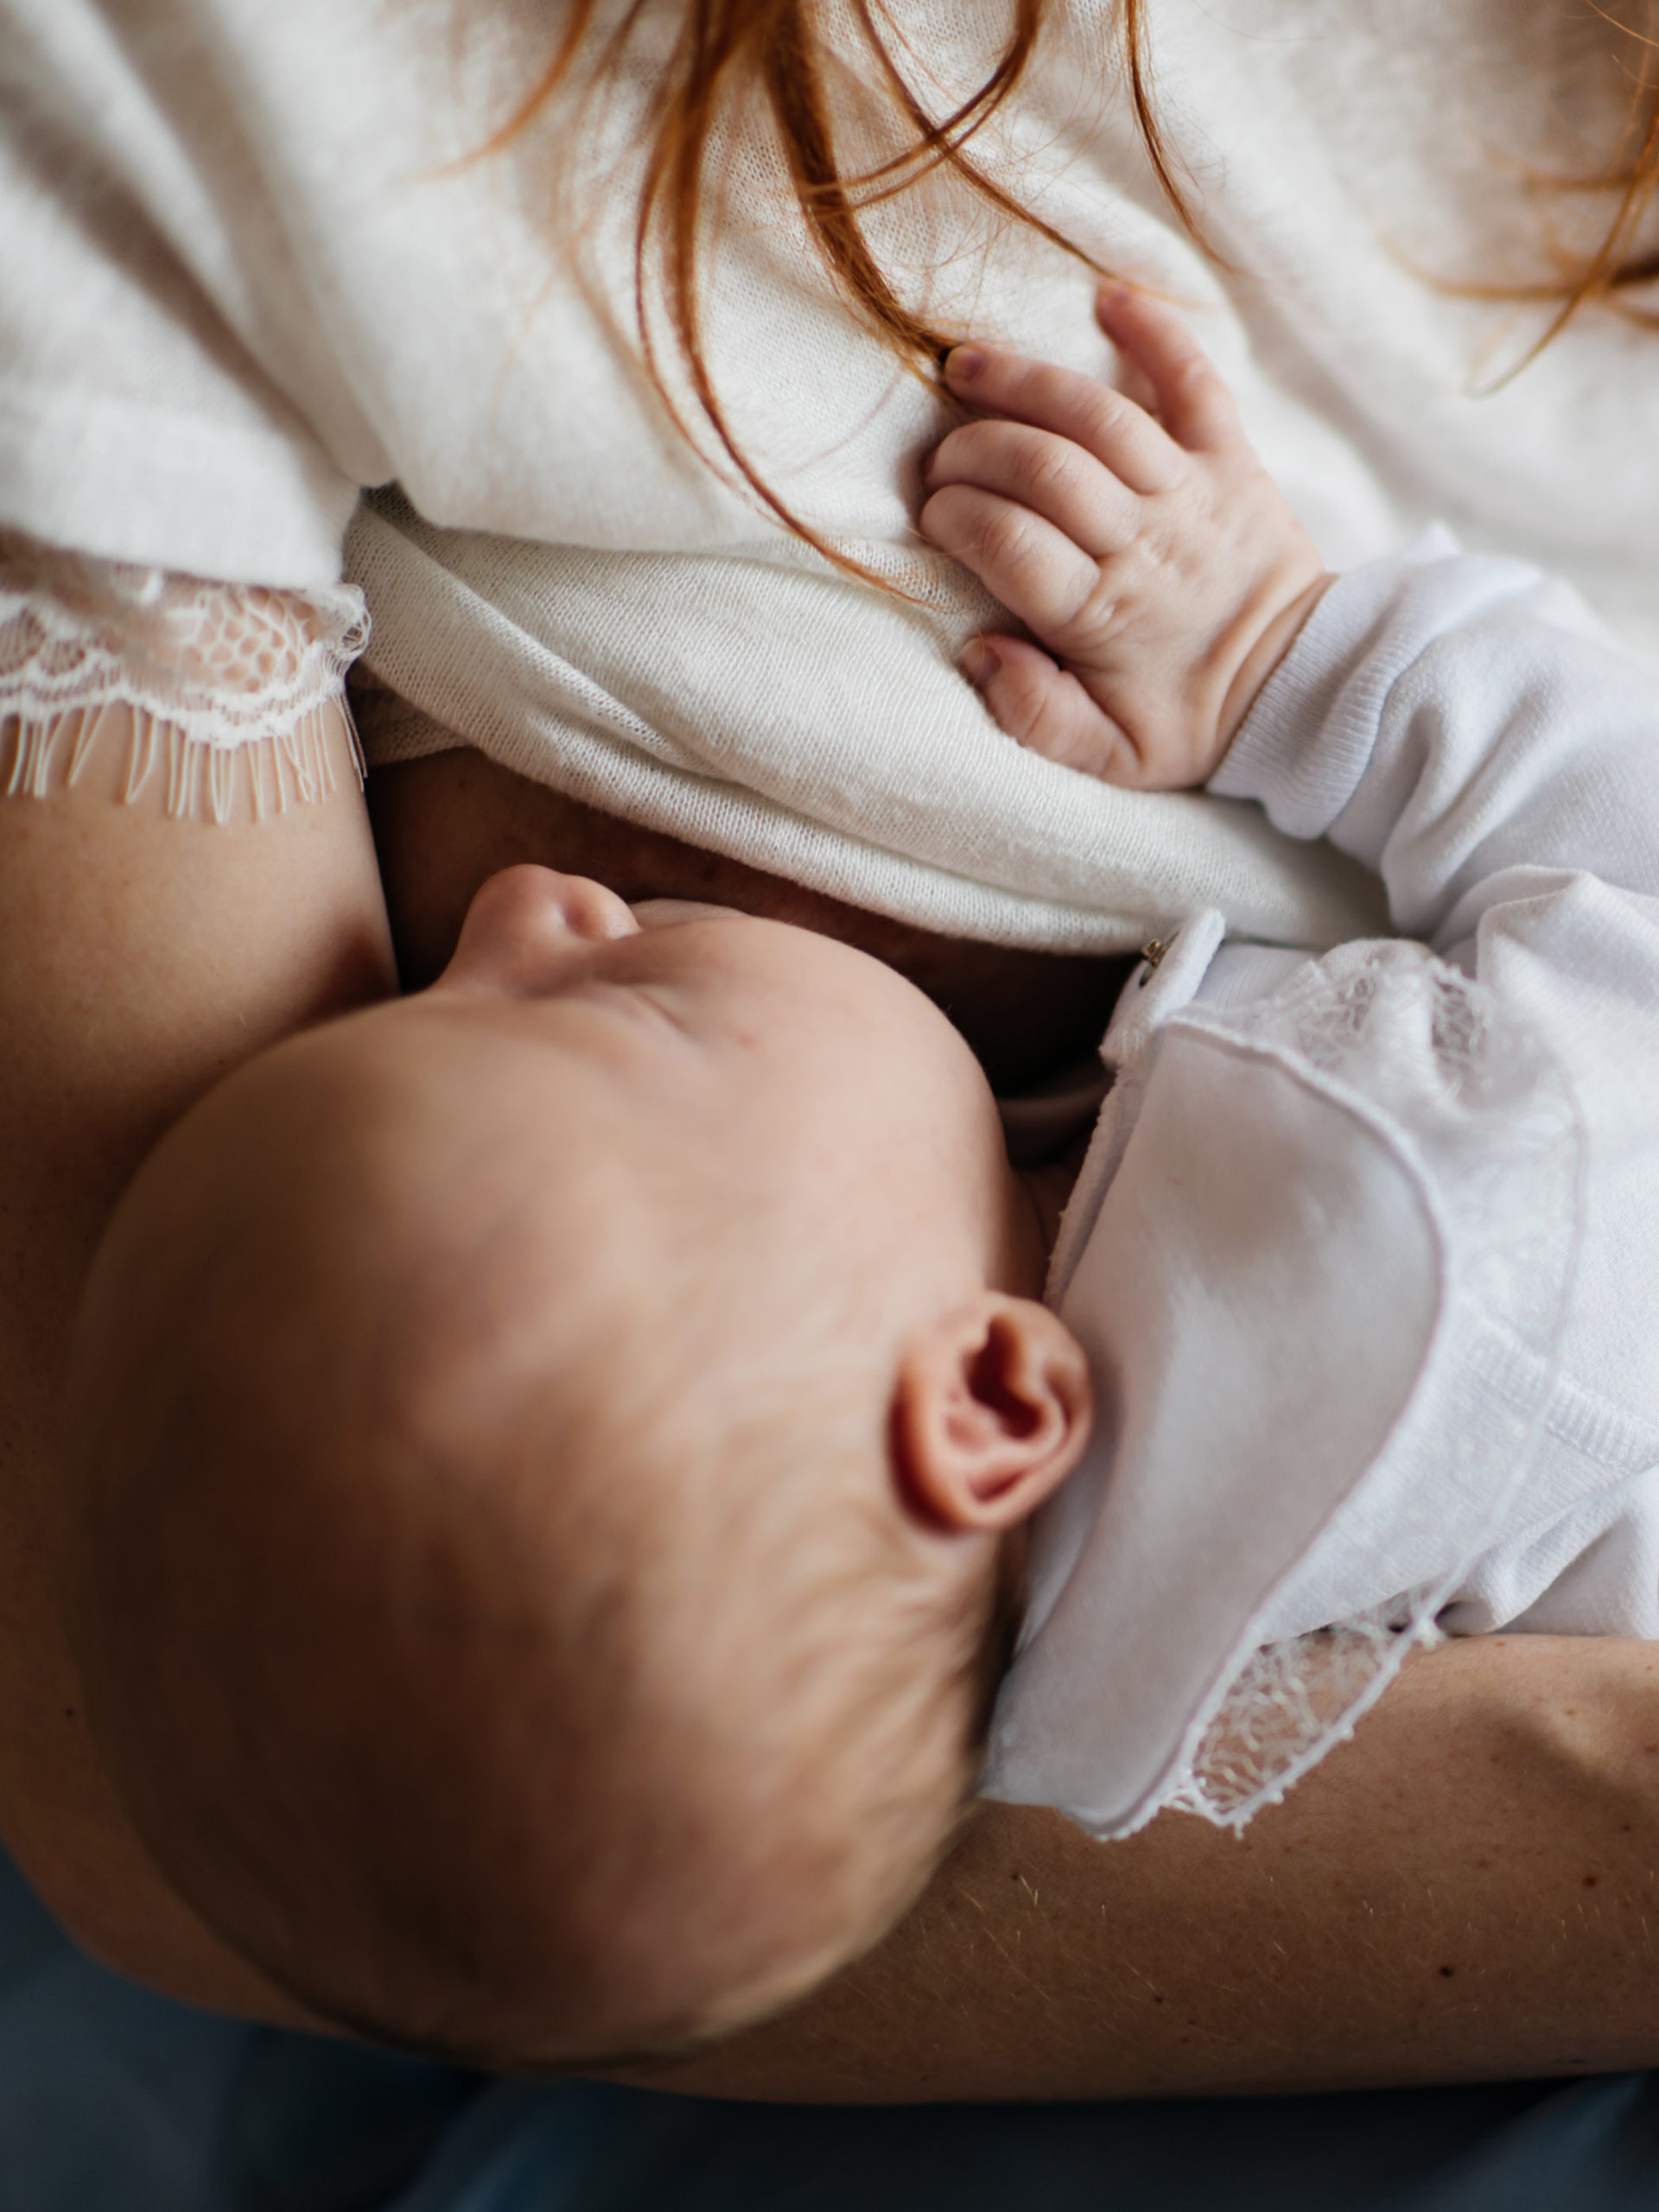 Newborn baby being breastfed by mother